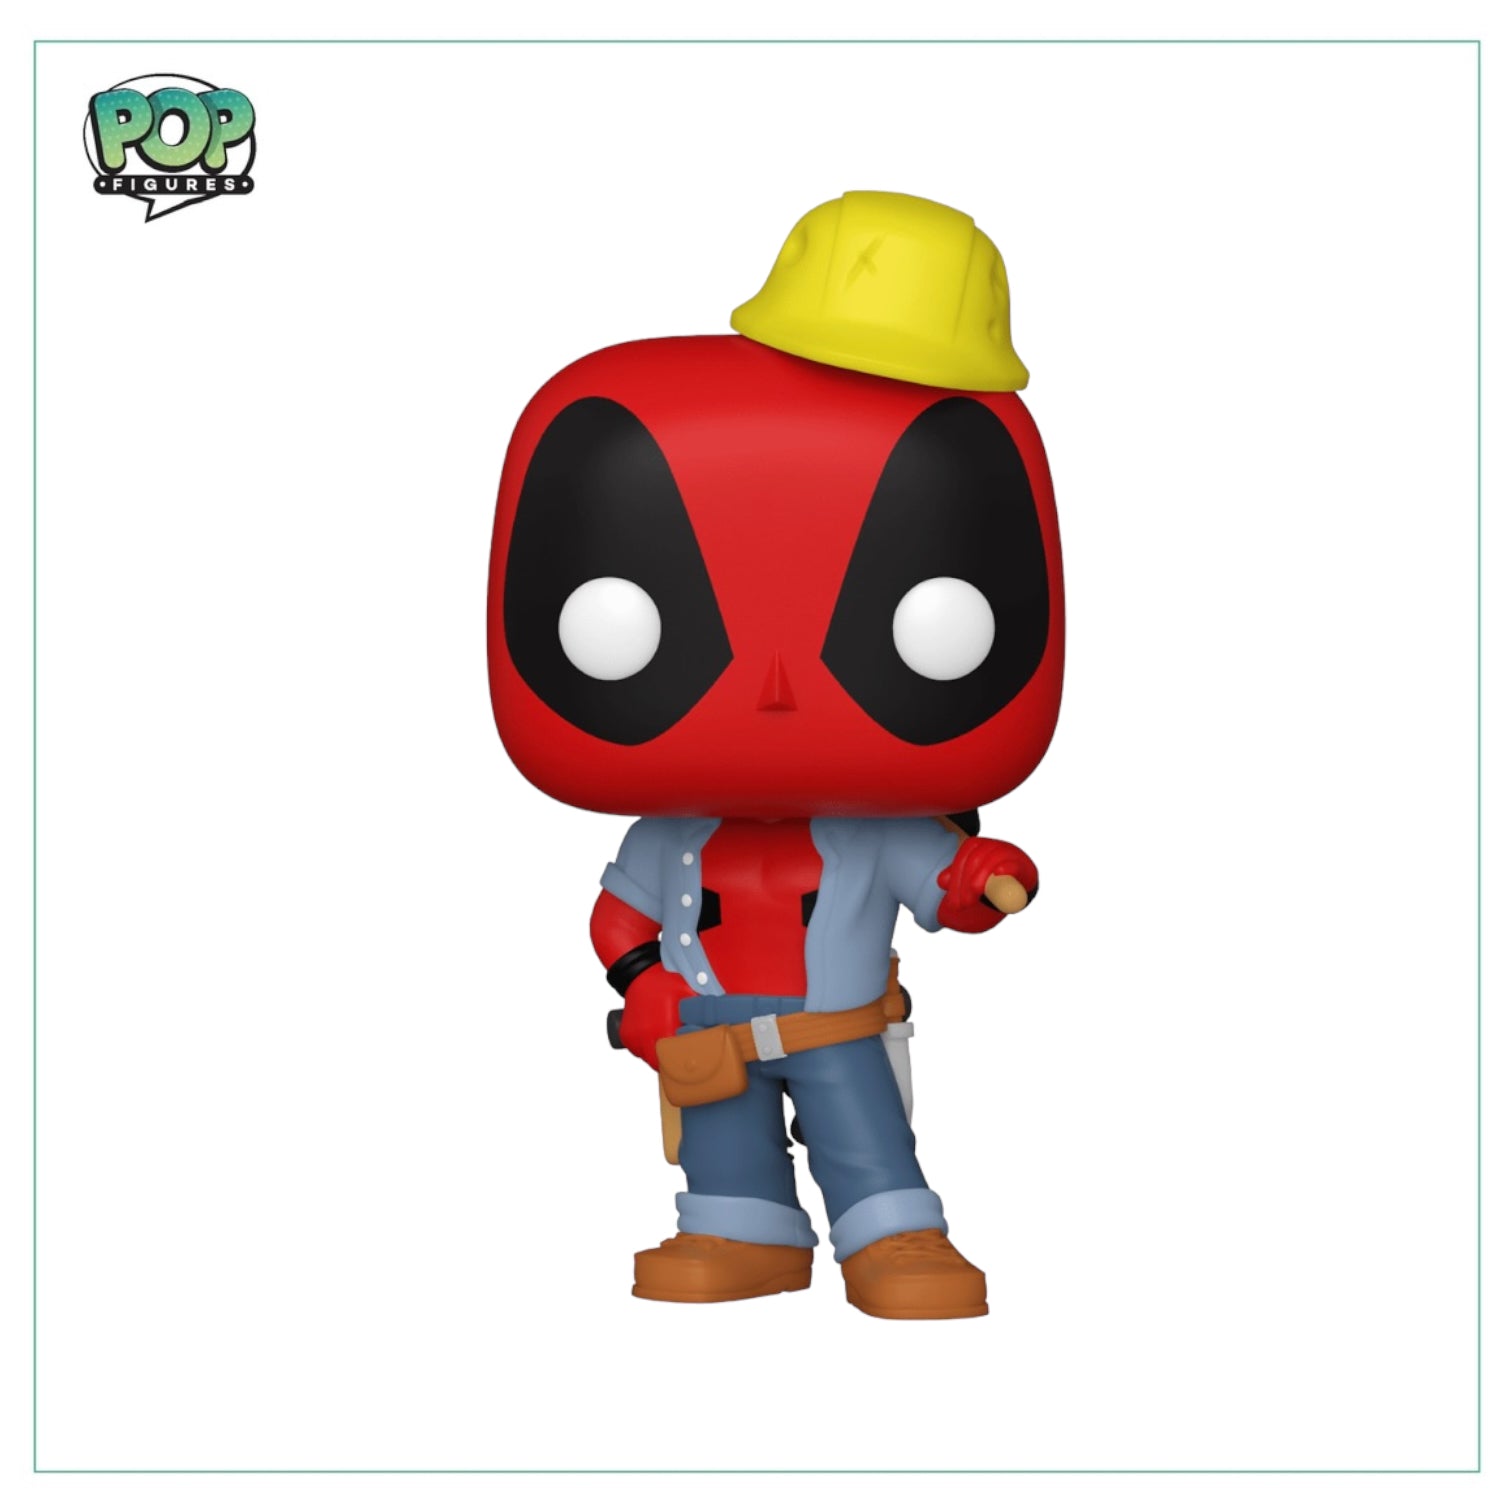 Funko Deadpool 30th Anniversary Pops Now Available In An Exclusive 4-Pack